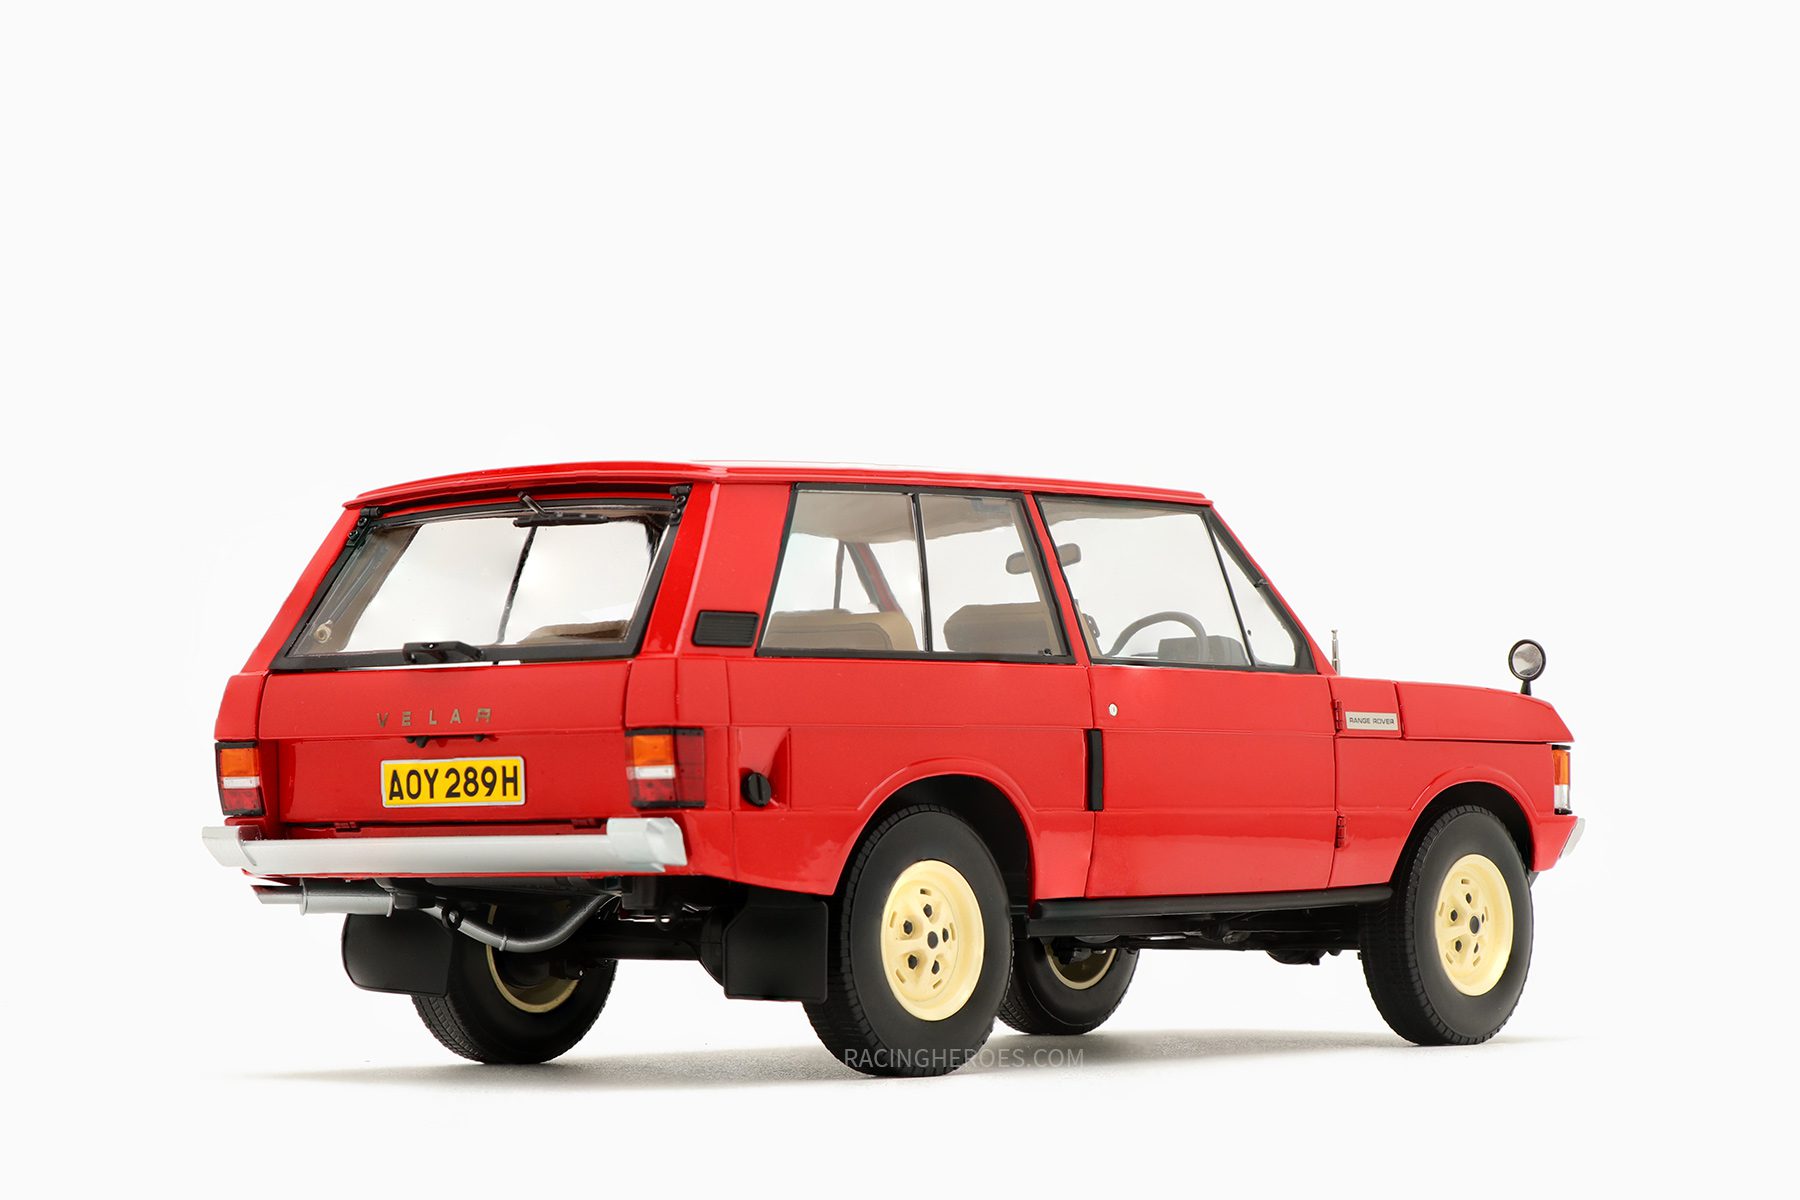 Range Rover Velar “First Prototype” 1969 1:18 by Almost Real